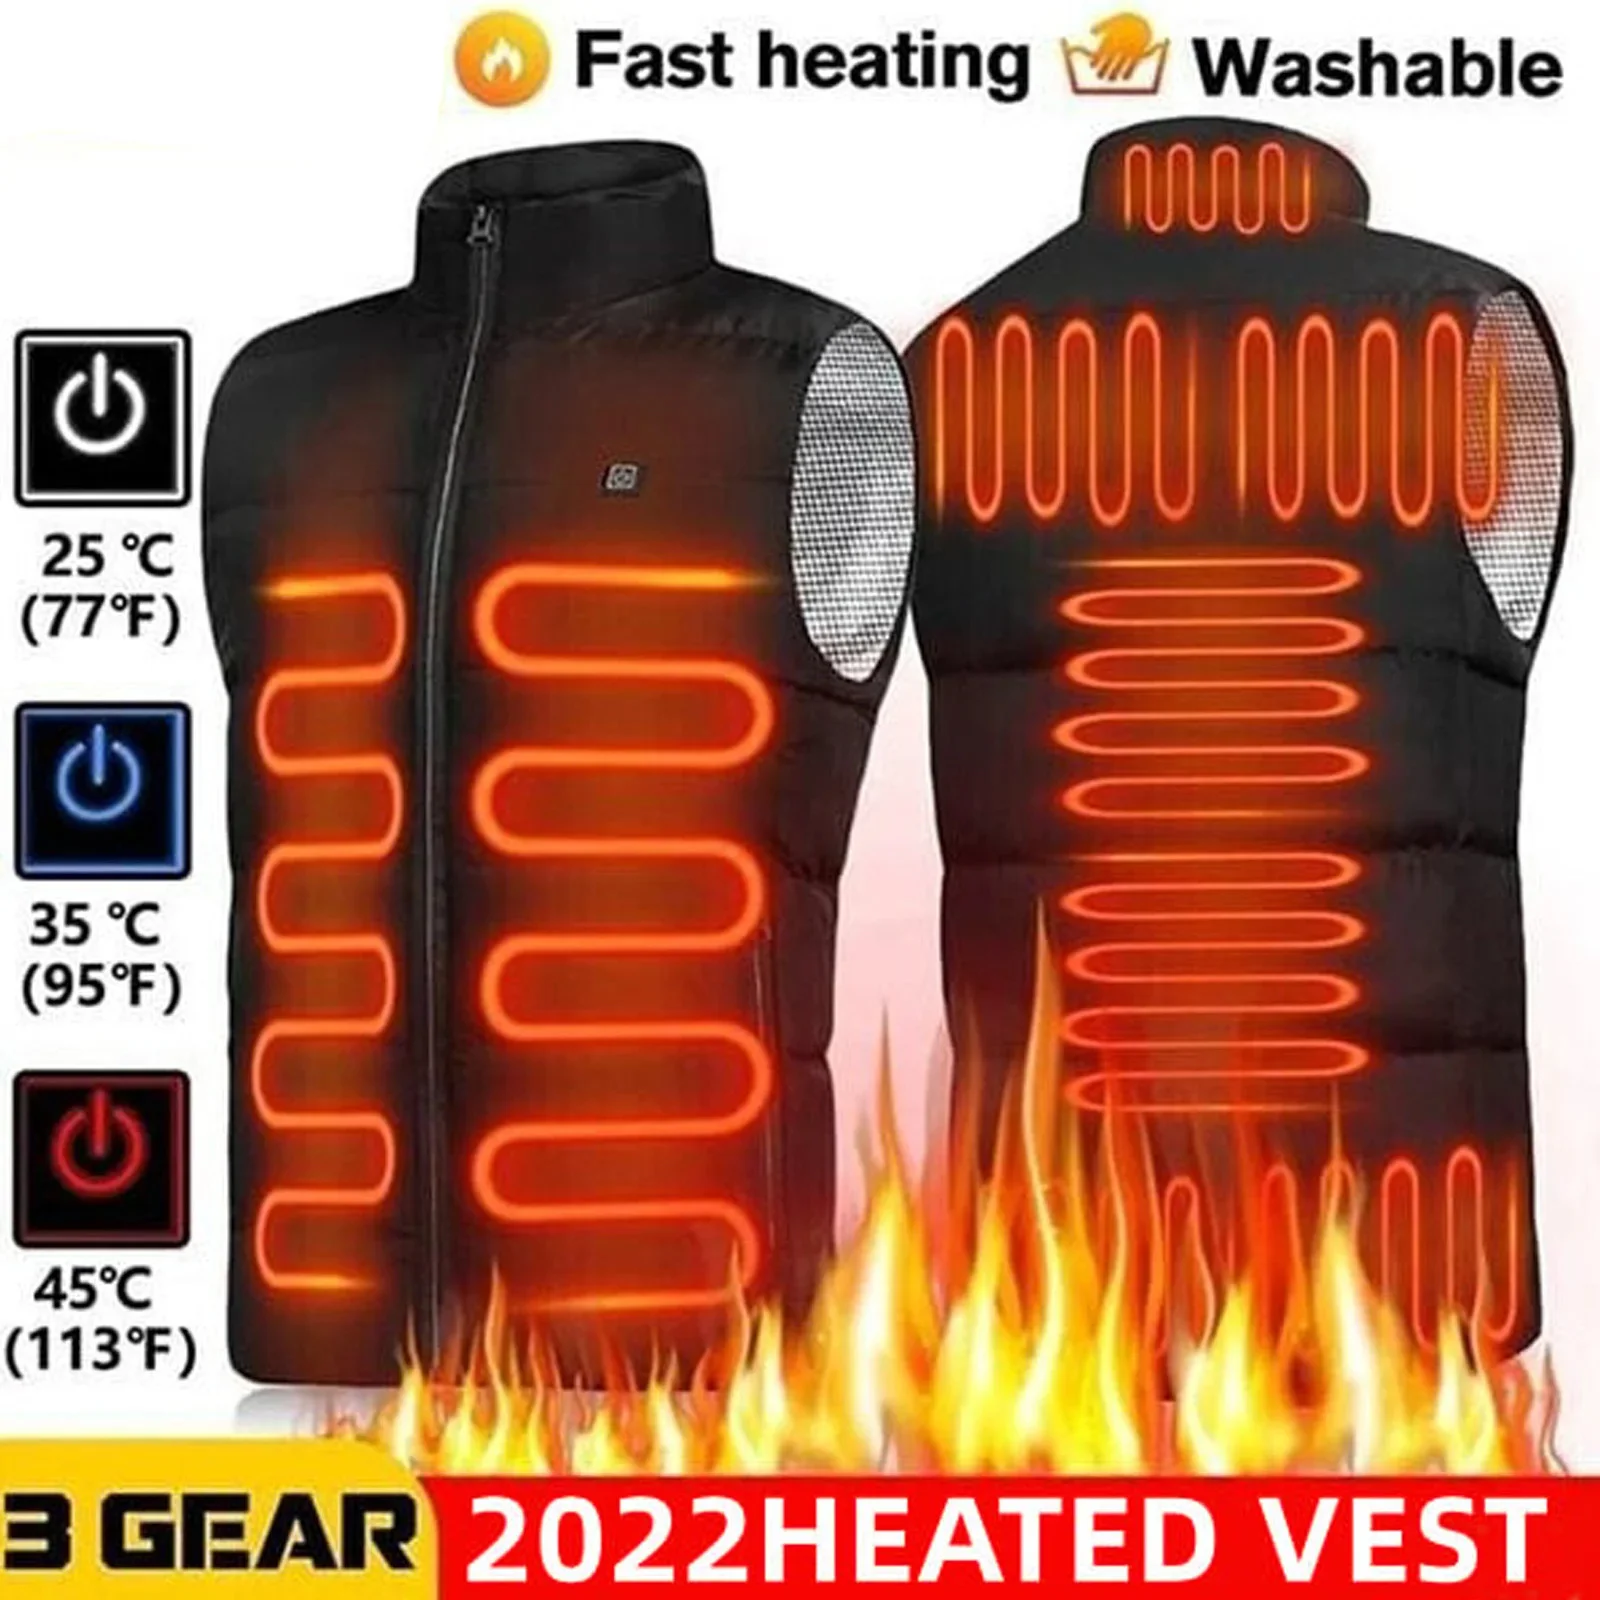 

Men USB Infrared Heating Vest Jacket Winter Flexible Electric Thermal Clothing Waistcoat Outdoor Fishing Hiking 9 Heating Zones